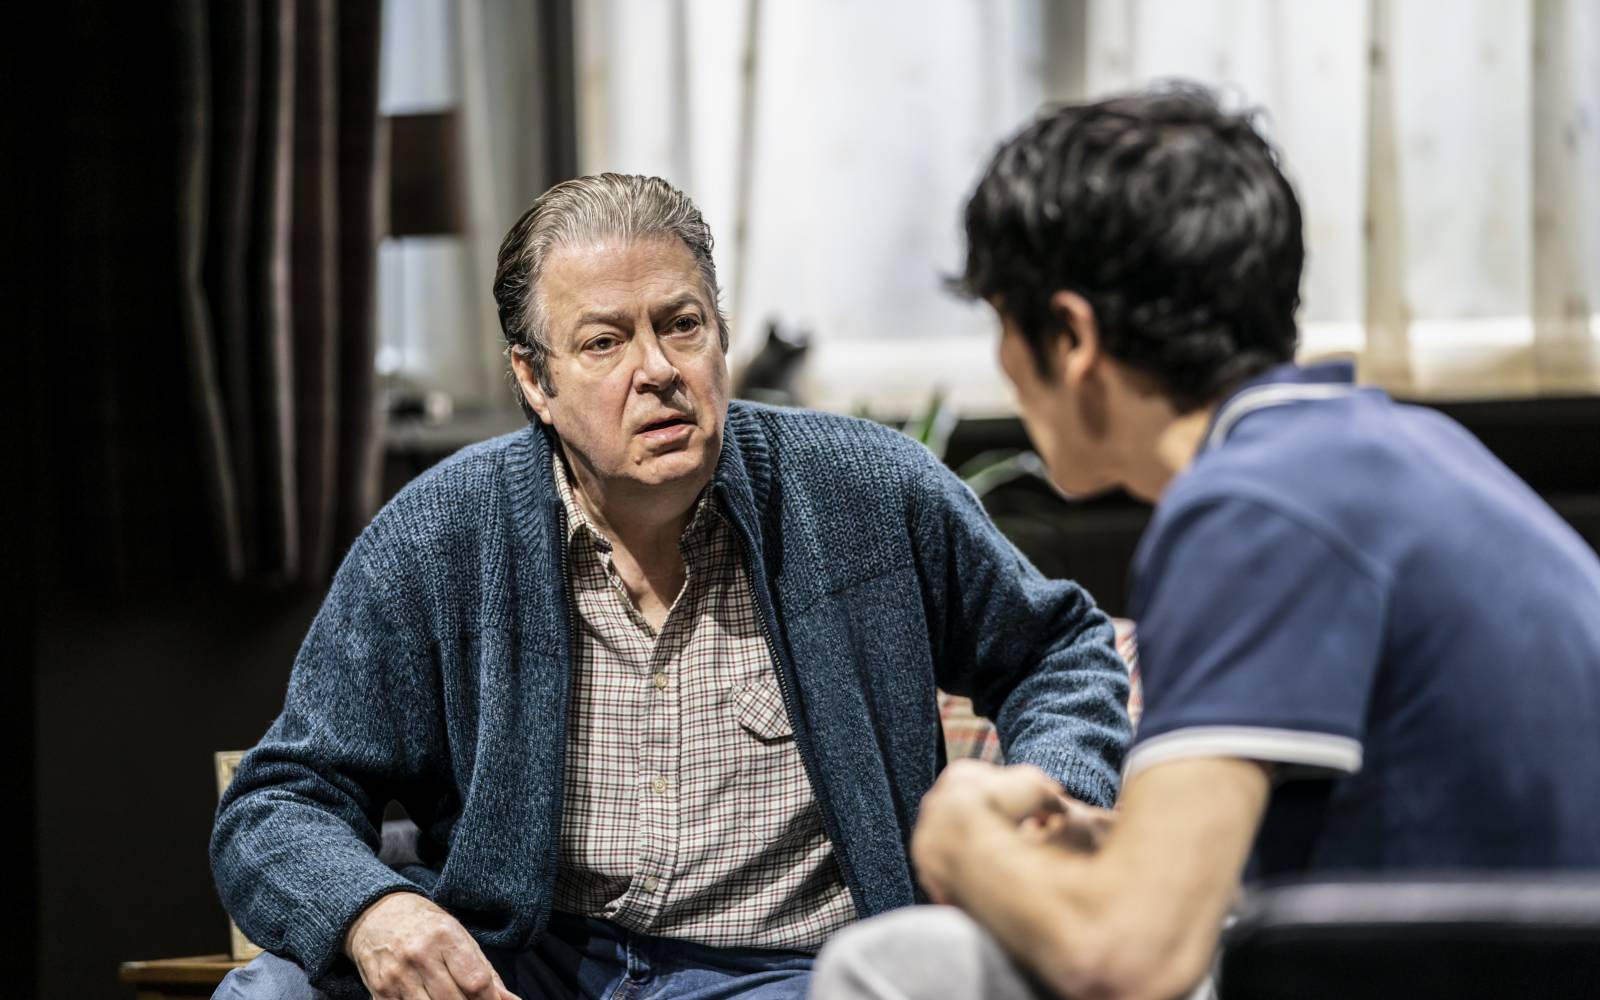 Roger Allam as Salter talks to Colin Morgan as his sons. Both are sitting, in modern dress